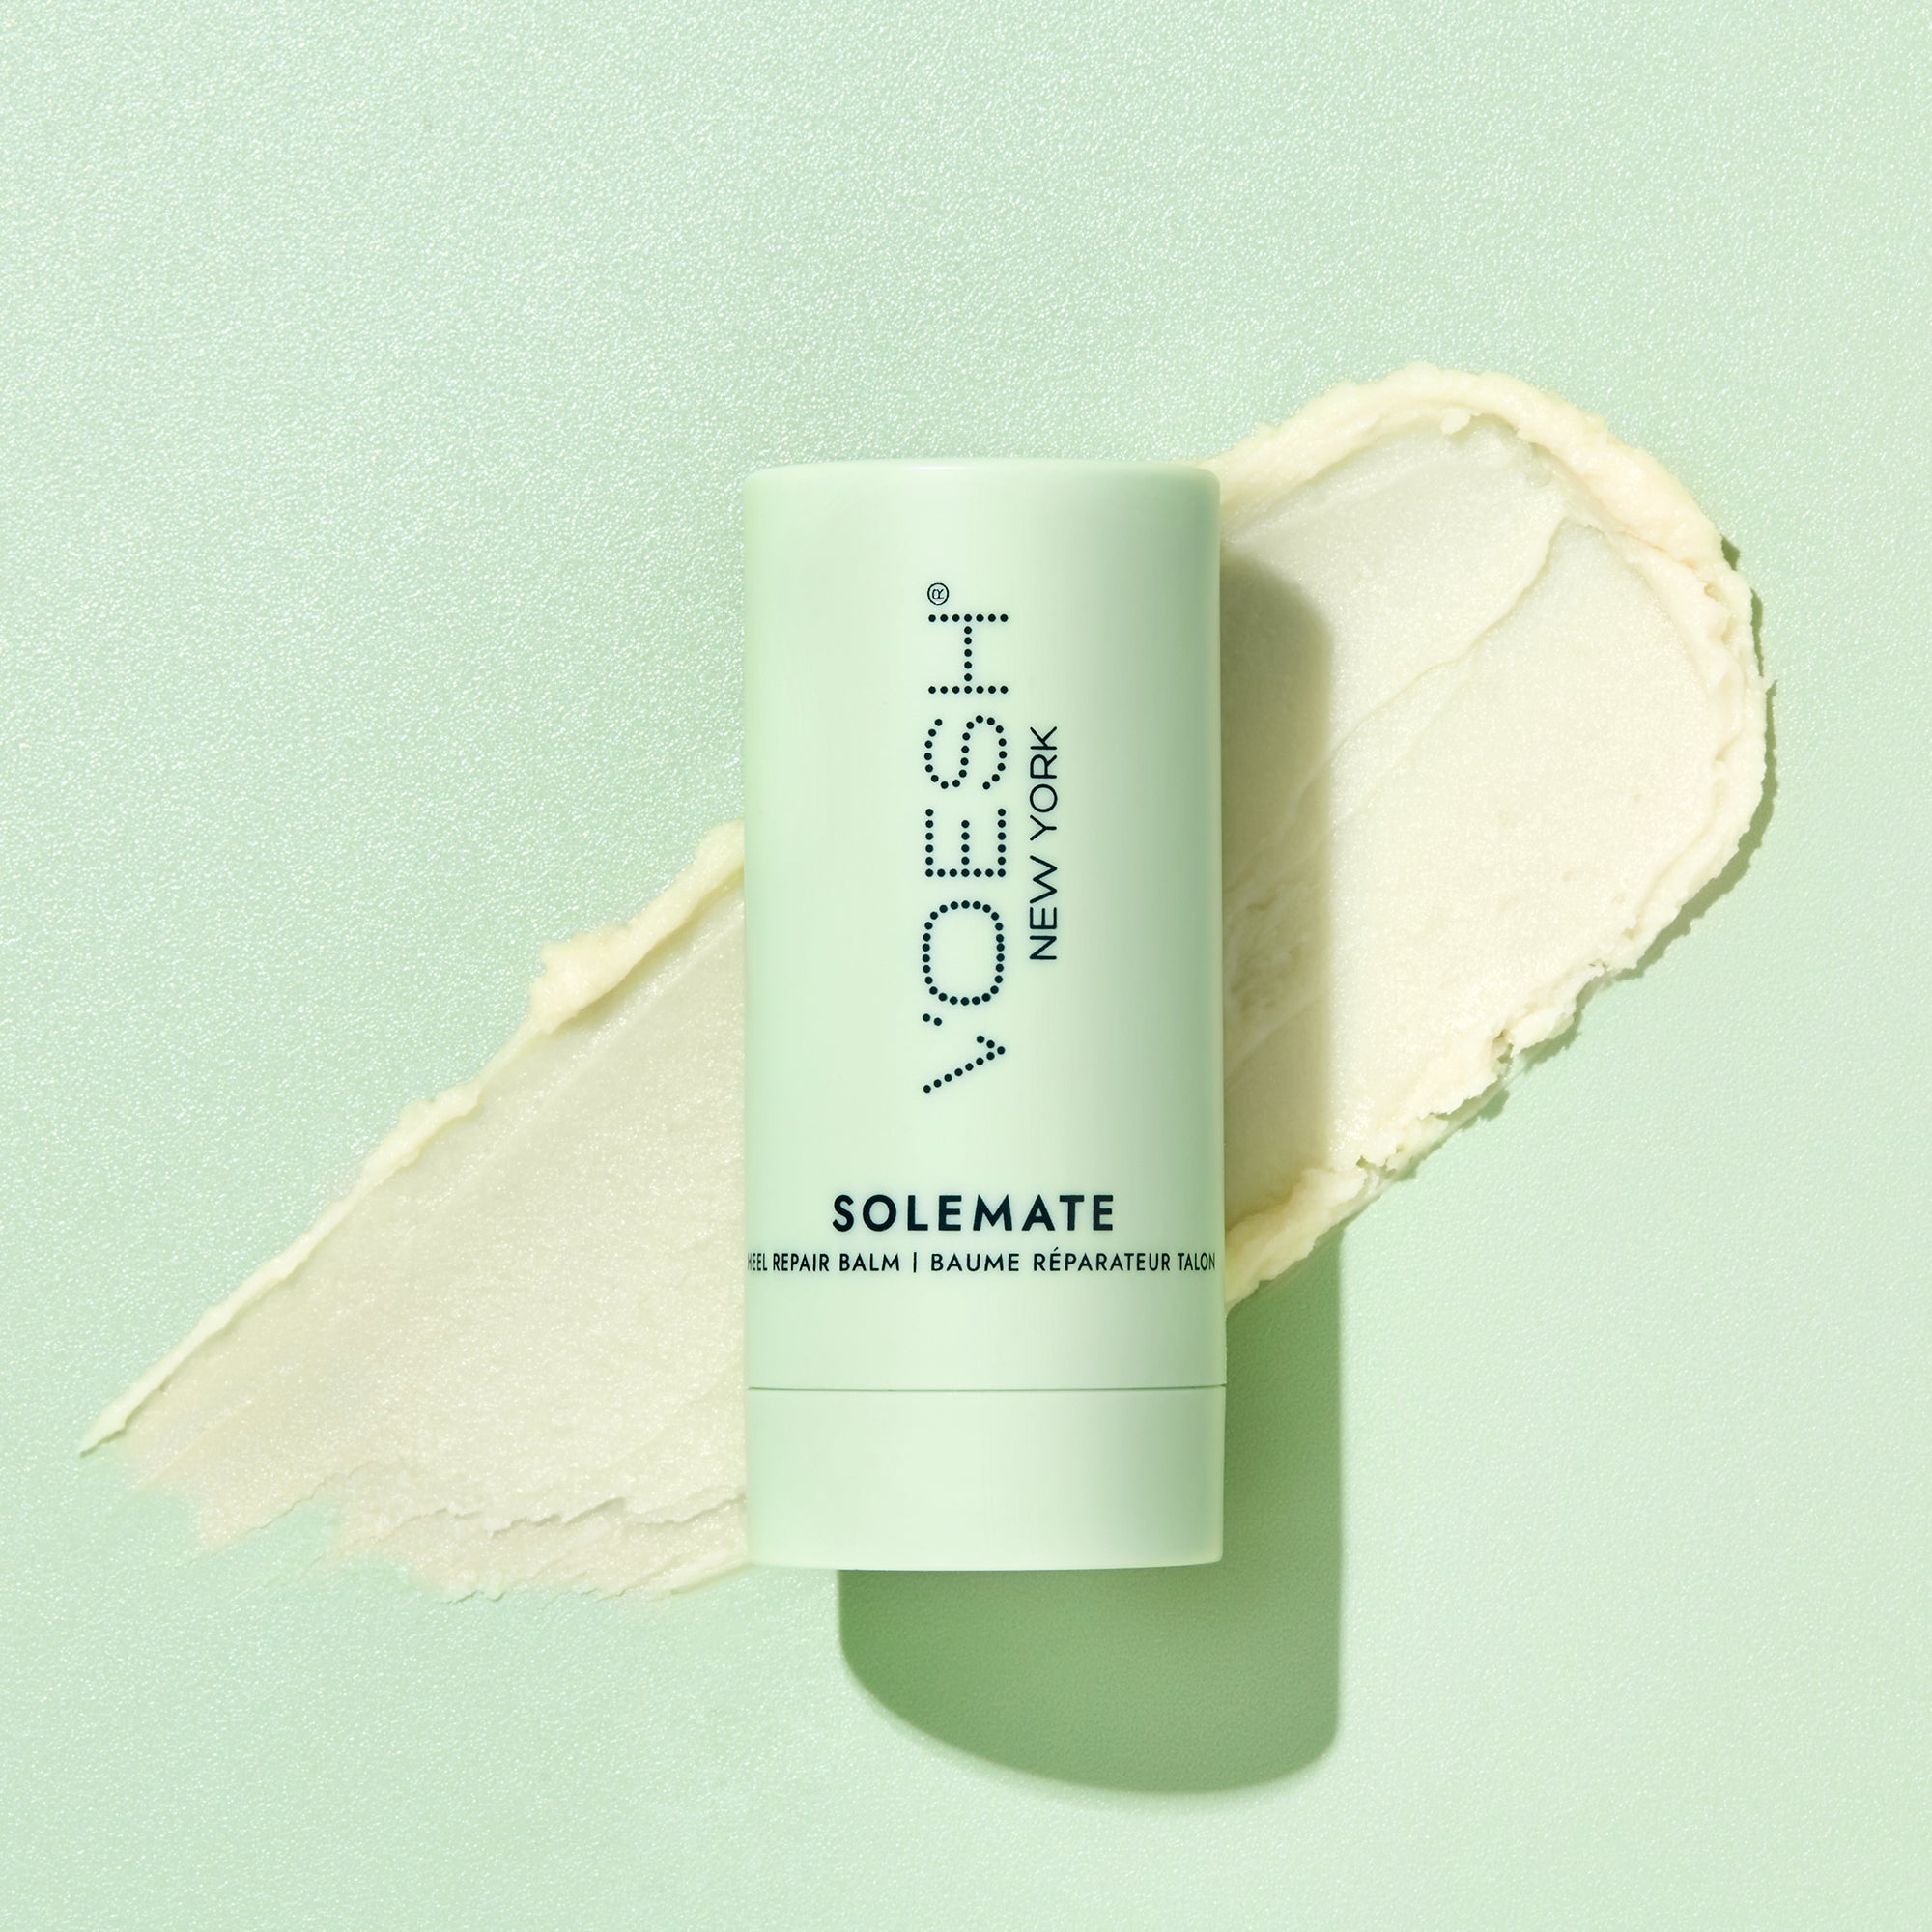 Solemate Heel Repair Balm pictured on top of its balm texture on a green background.